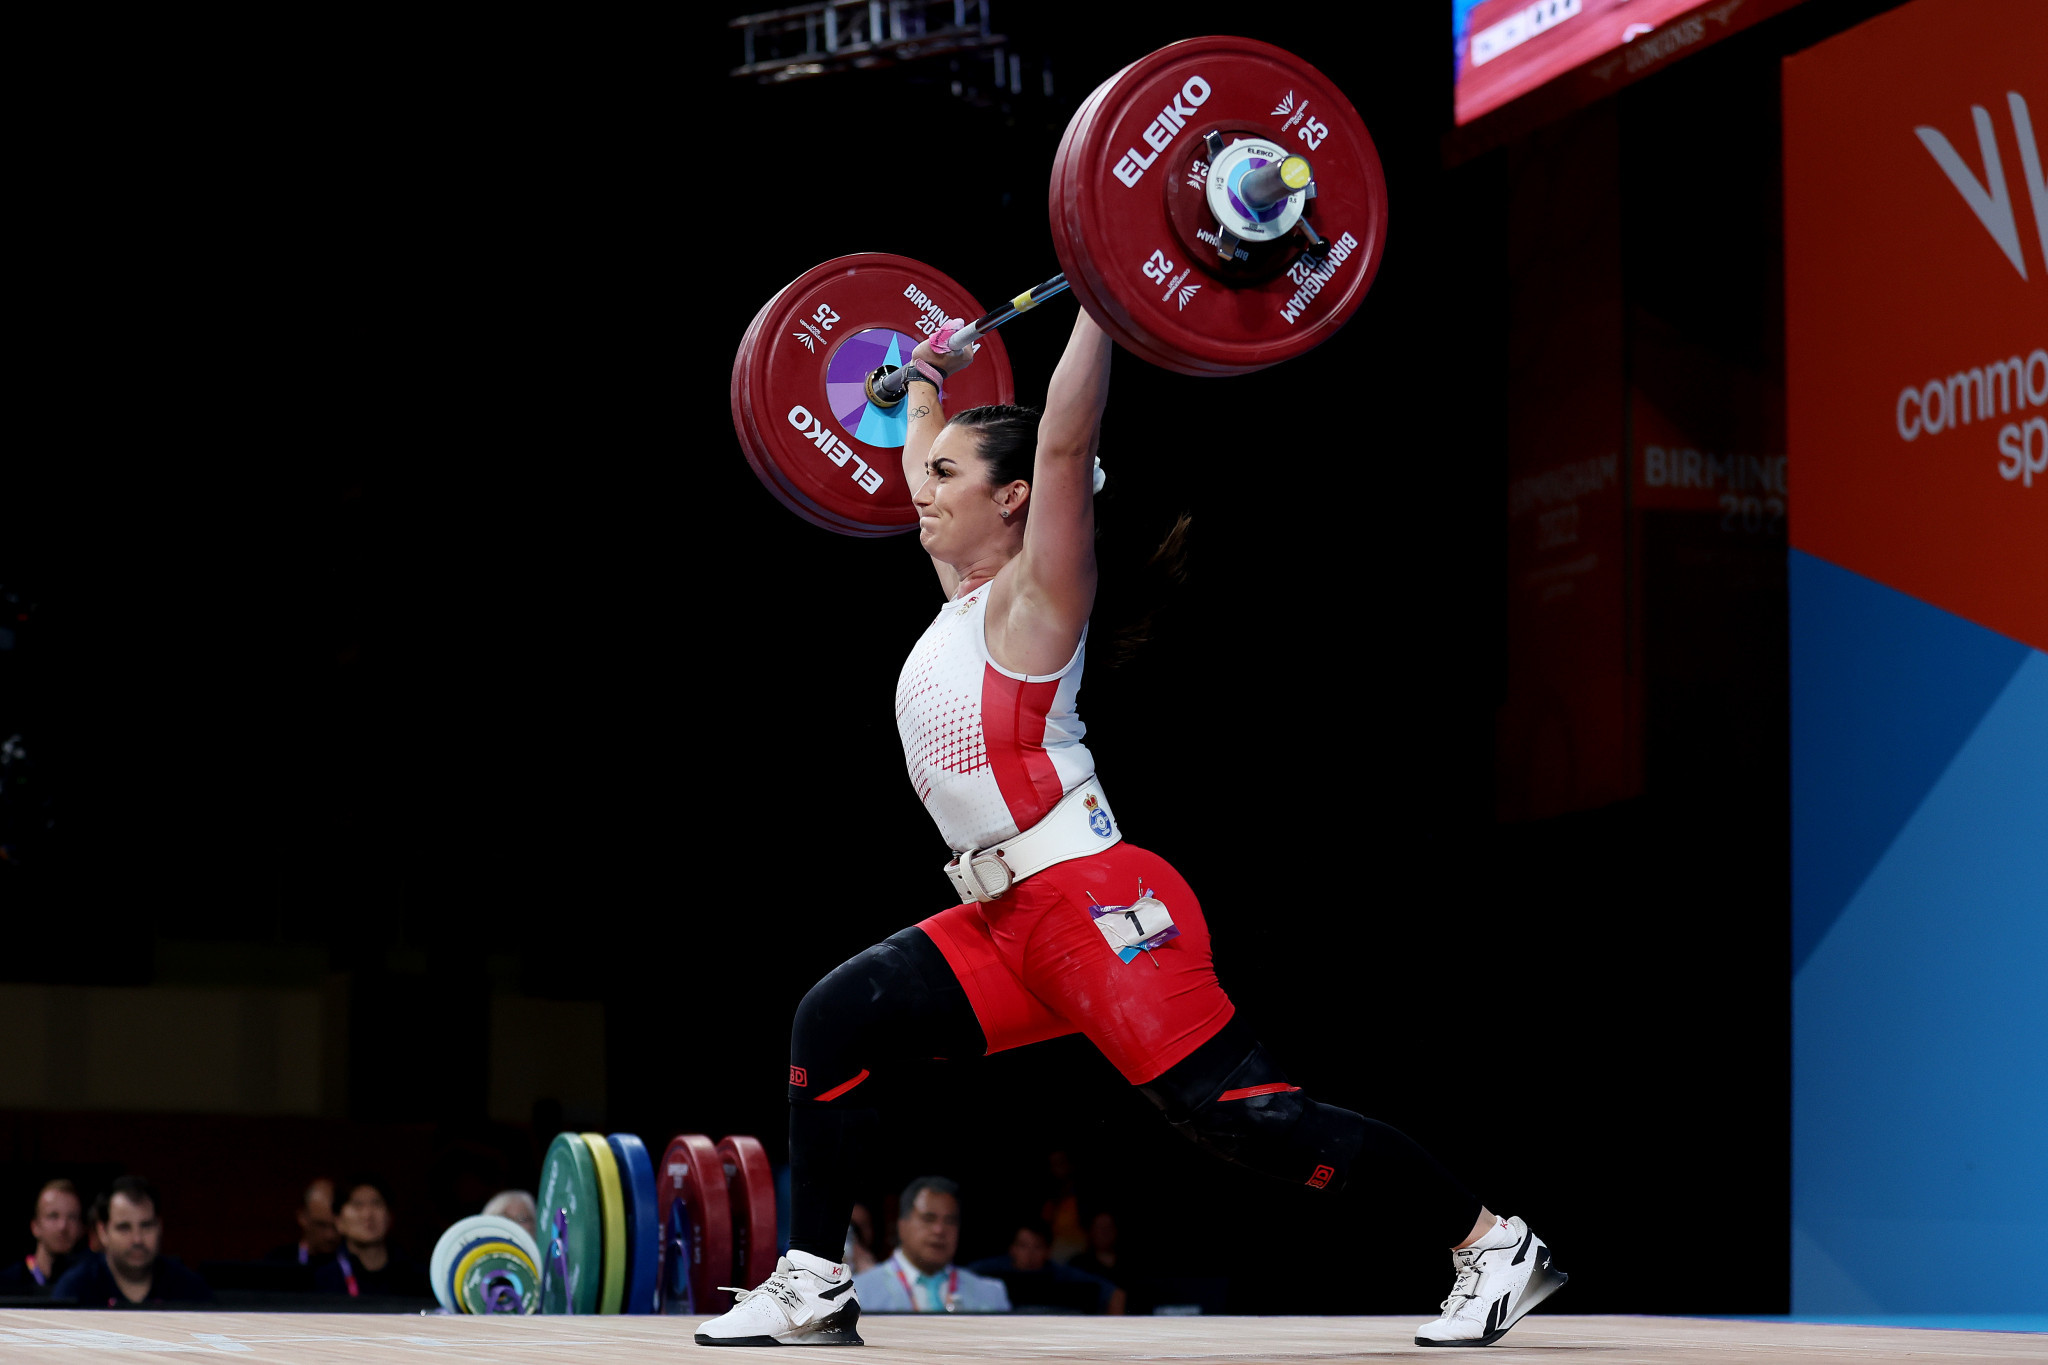 England's Sarah Davies lifted 126kg on her second clean and jerk attempt to win women's 71kg gold ©Getty Images